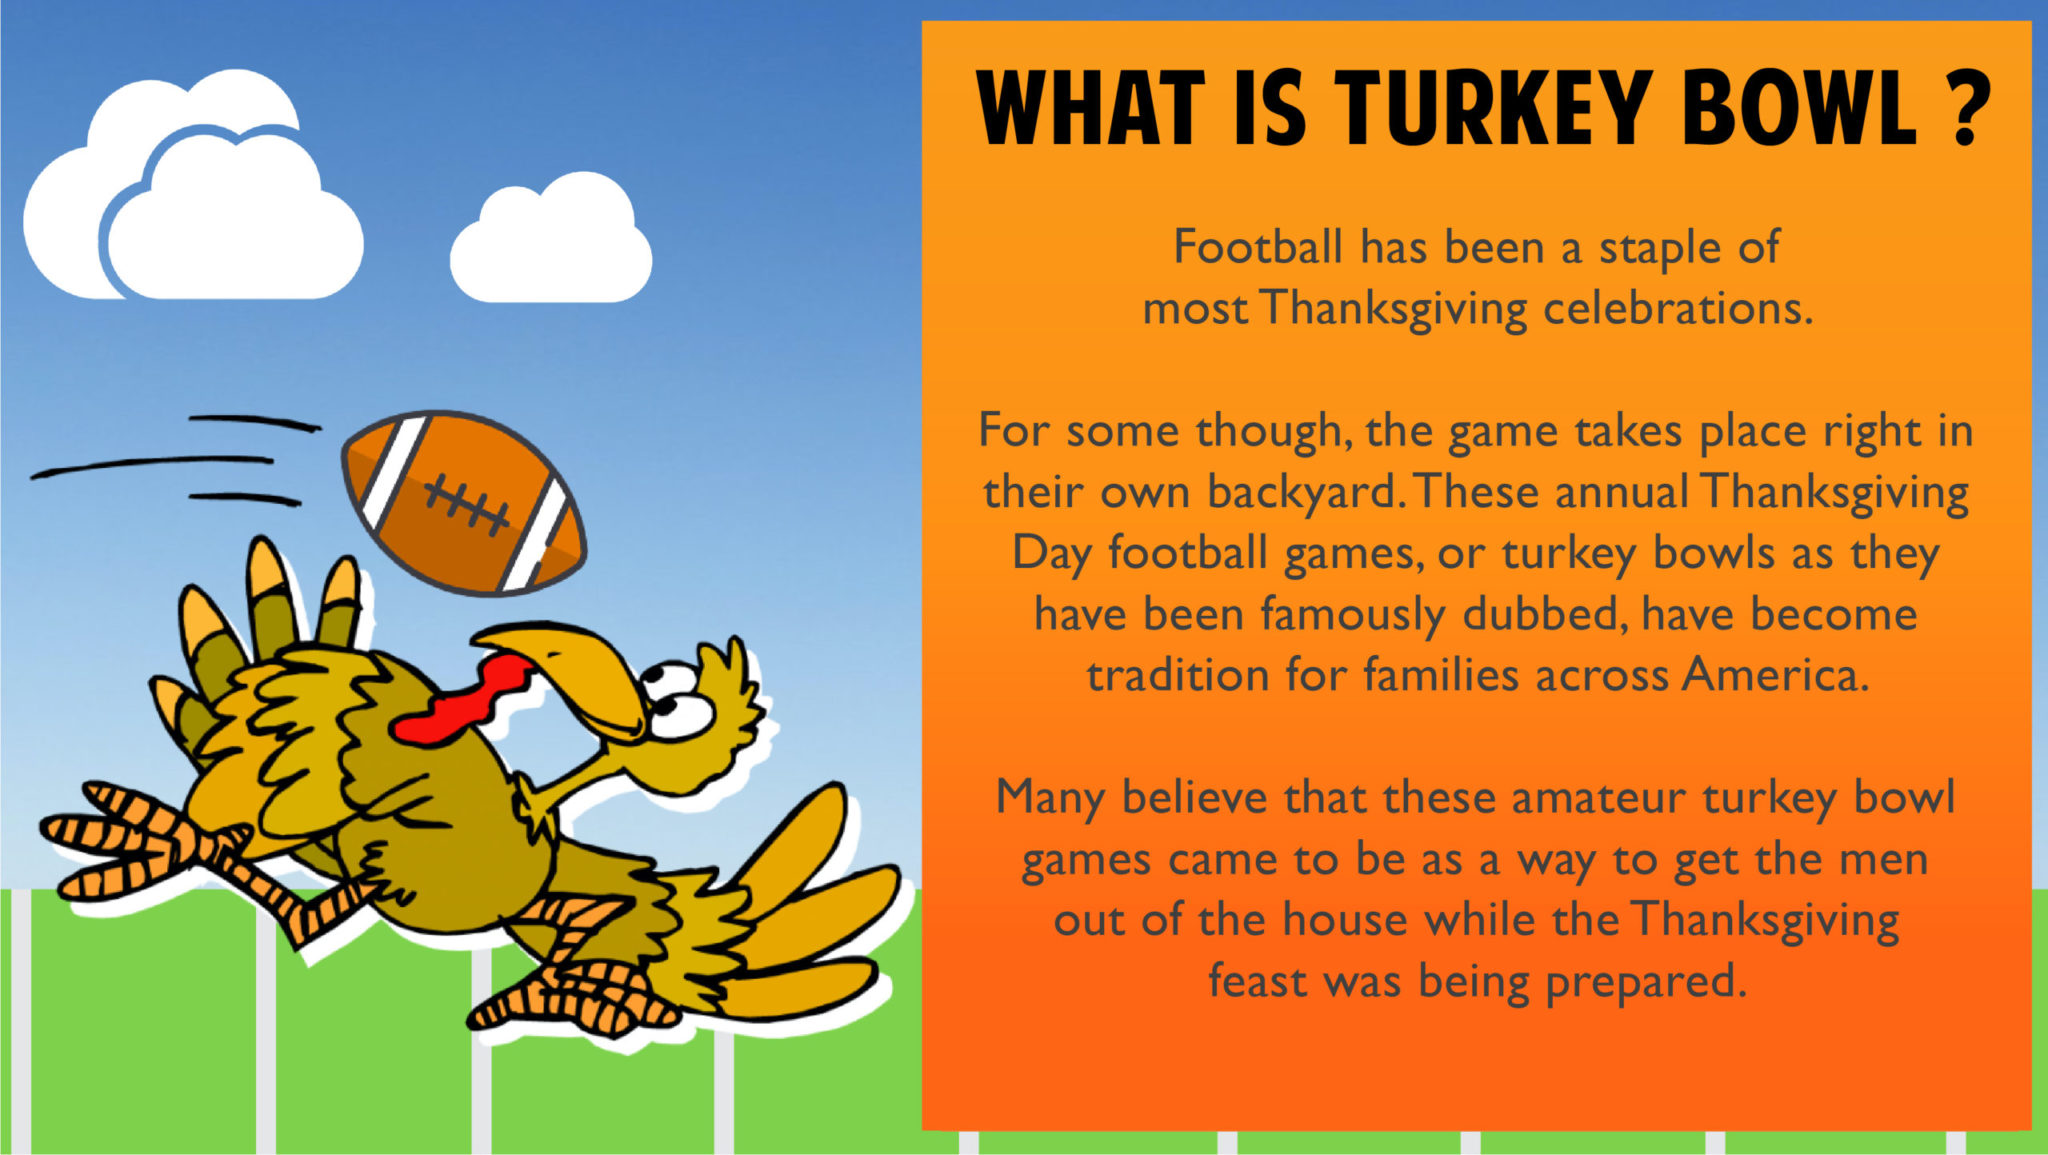 Annual turkey bowl becomes bonding experience - The Rider Newspaper